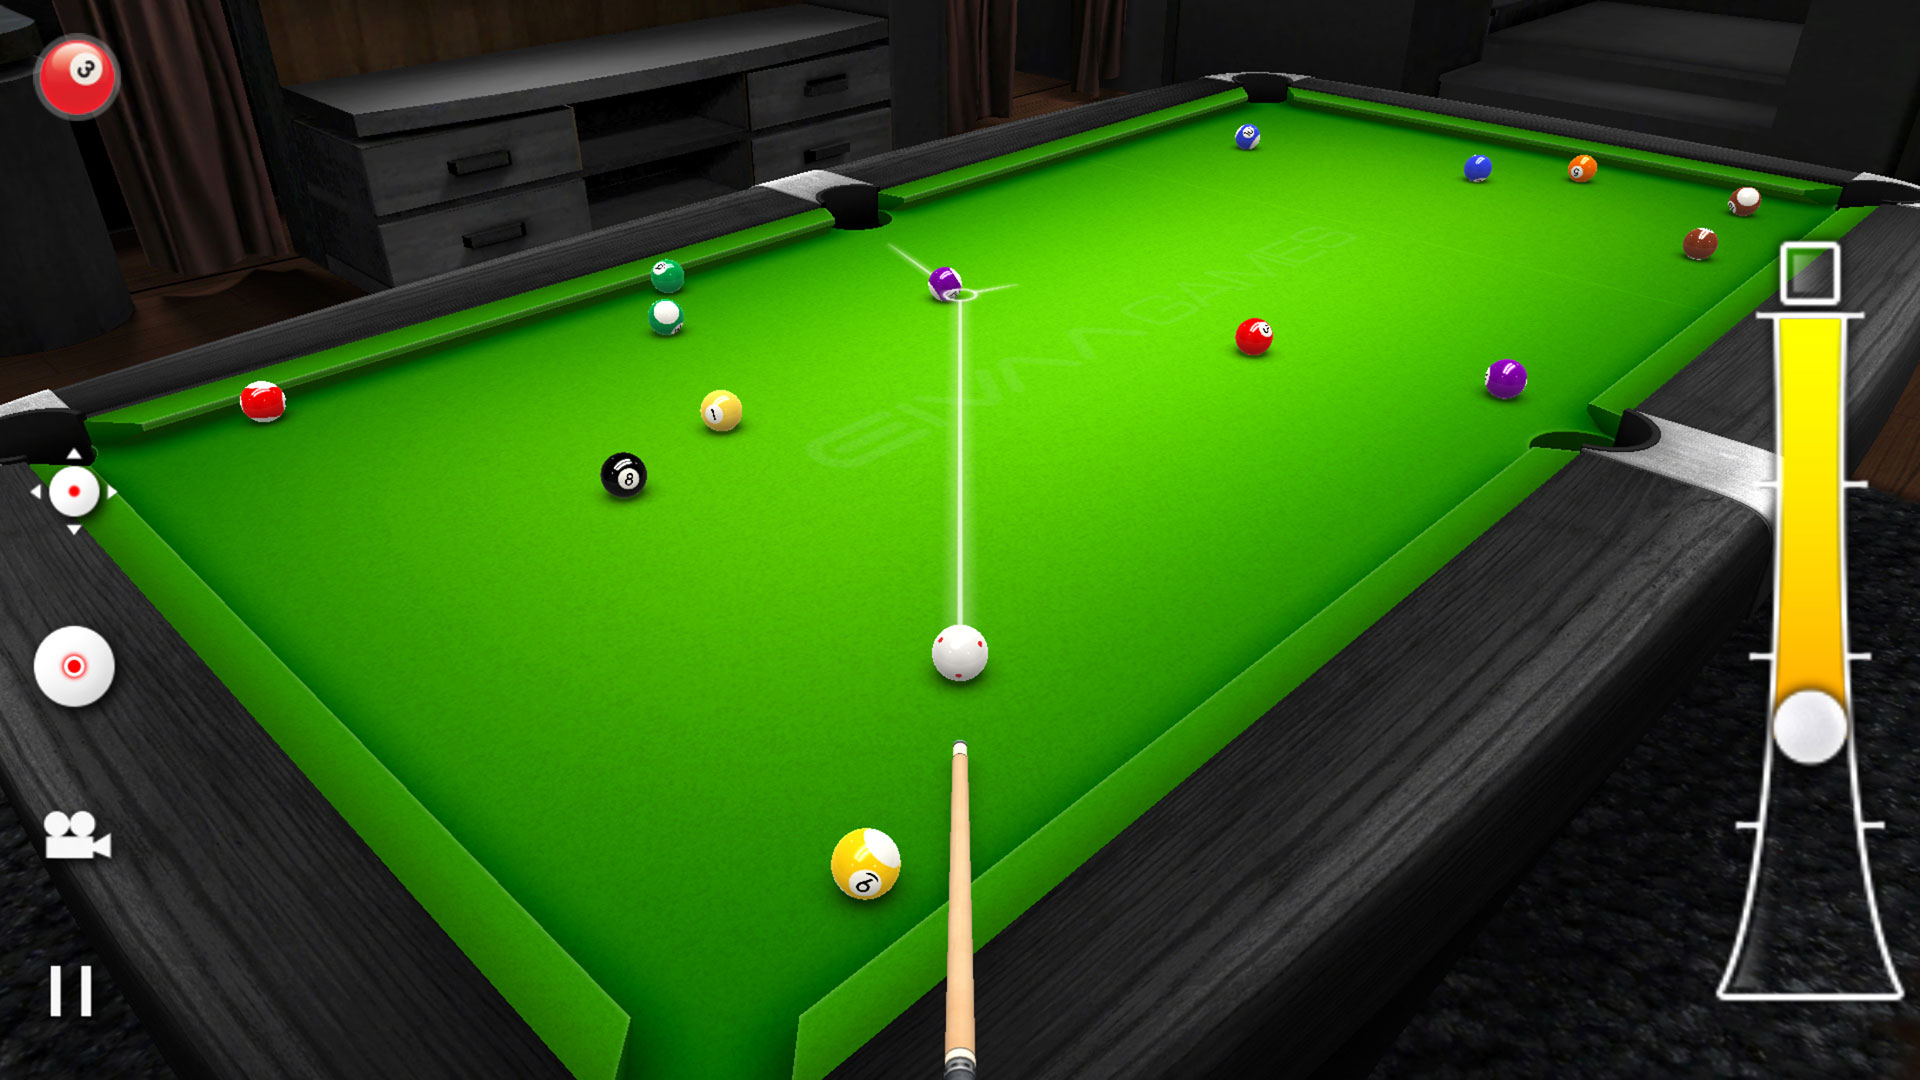 download the last version for ios Pool Challengers 3D